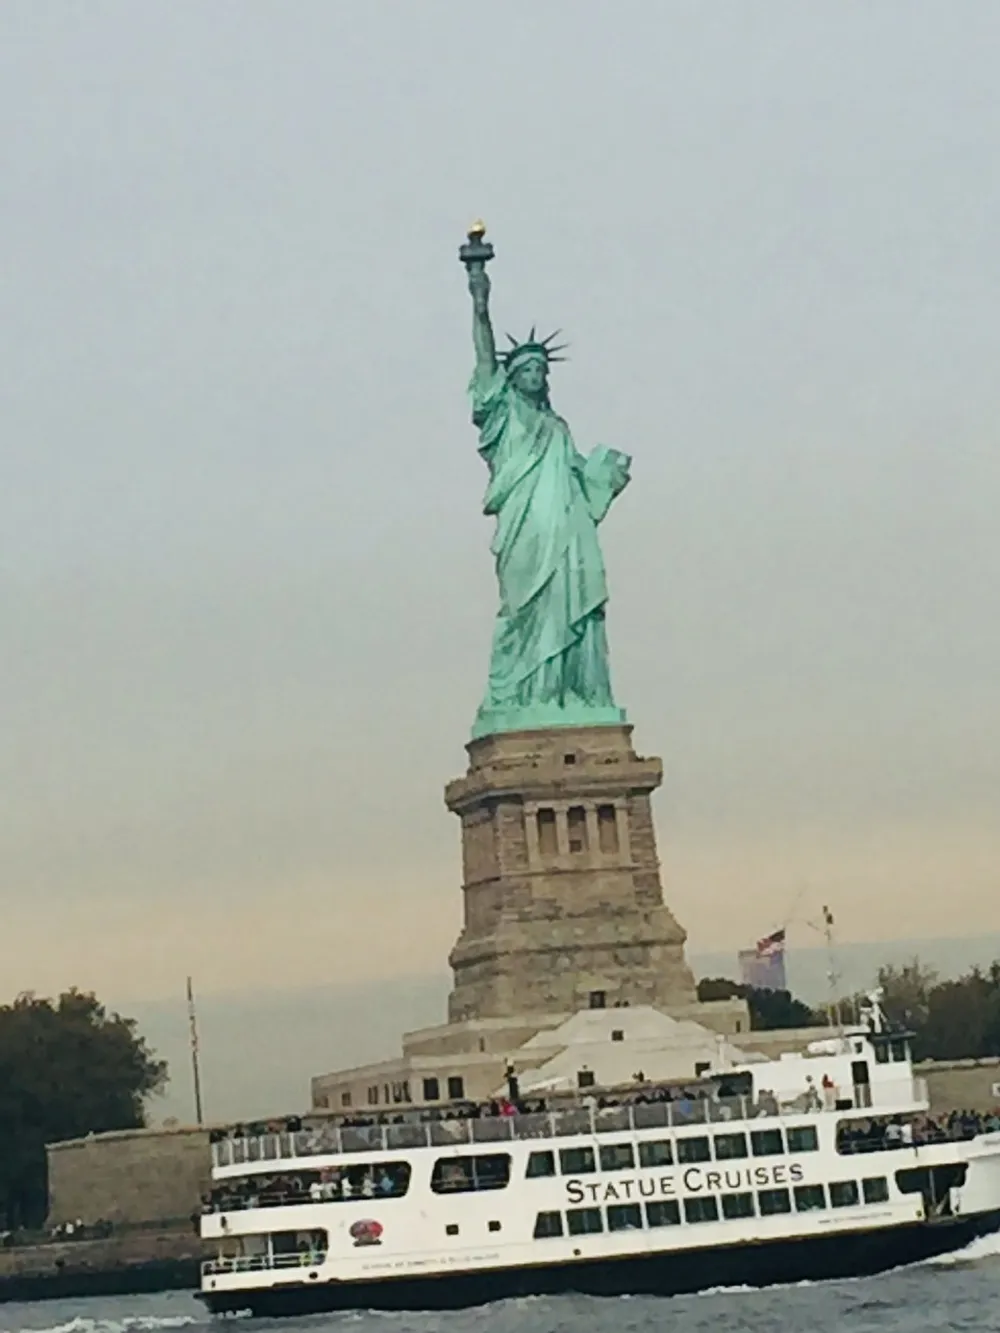 The image shows the iconic Statue of Liberty with a Statue Cruises ferry passing by in the foreground